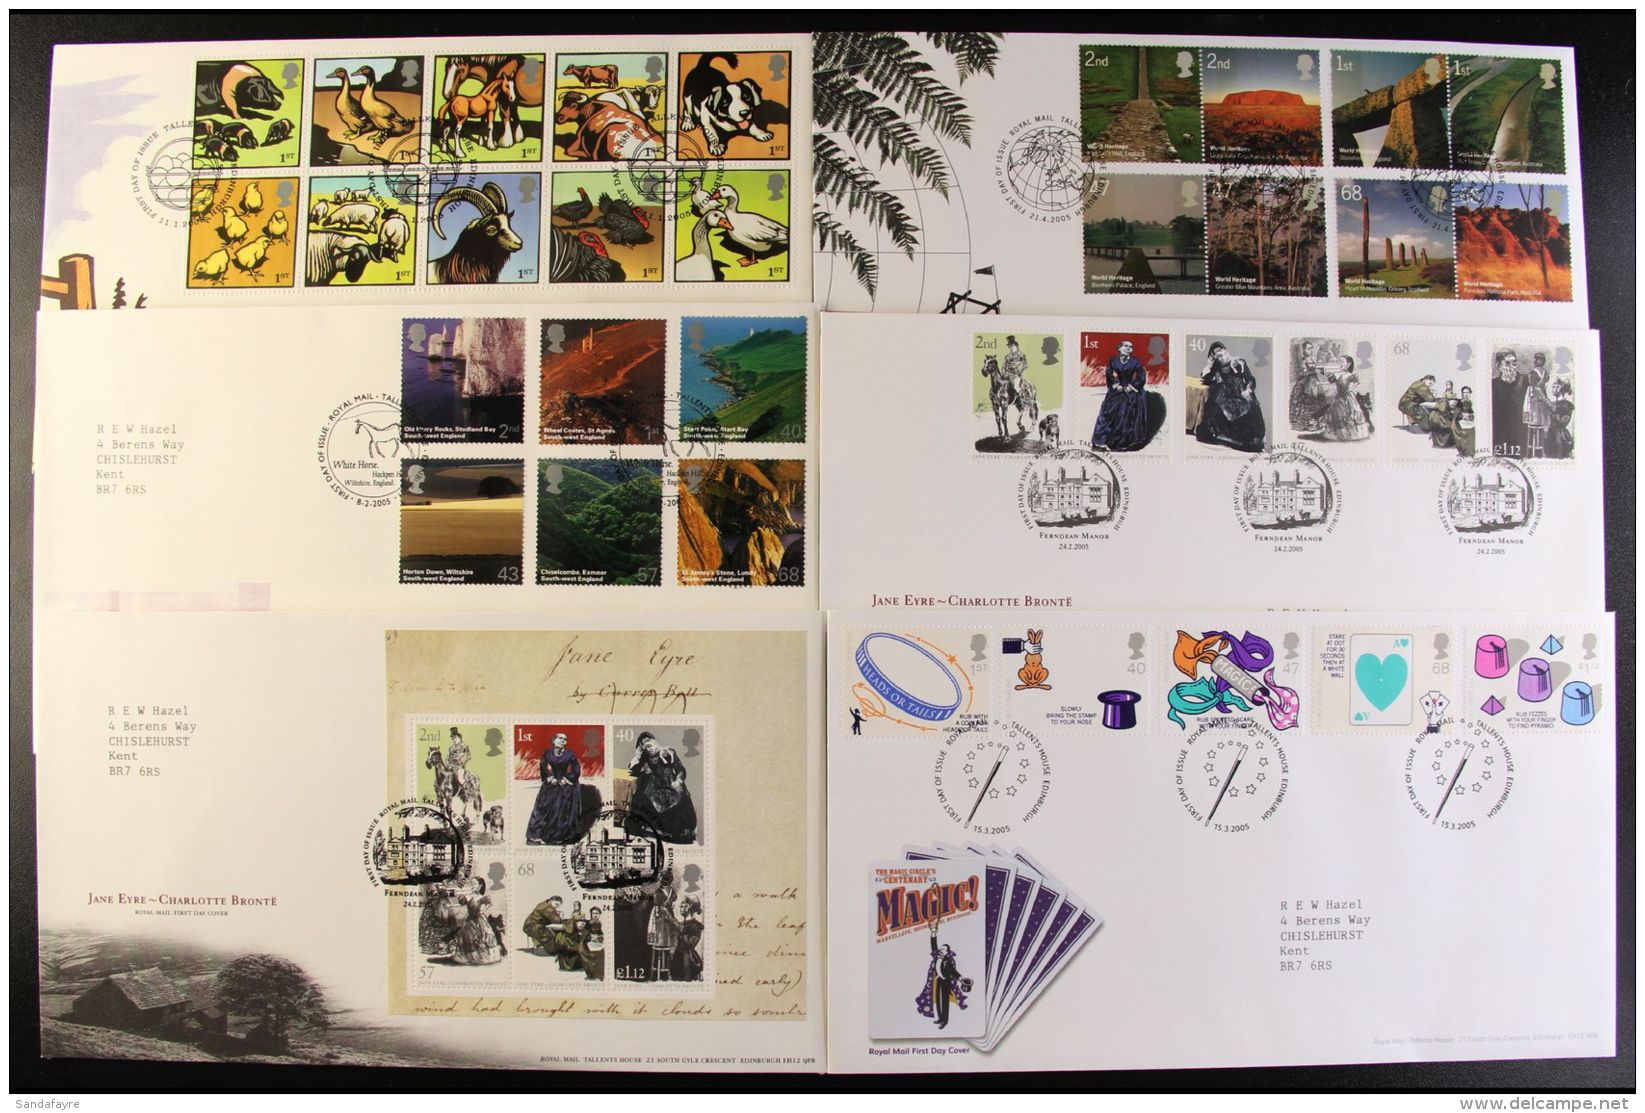 2005 COMPLETE YEAR SET Of Commemorative, Illustrated First Day Covers With Neatly Typed Addresses. Current Retail... - FDC